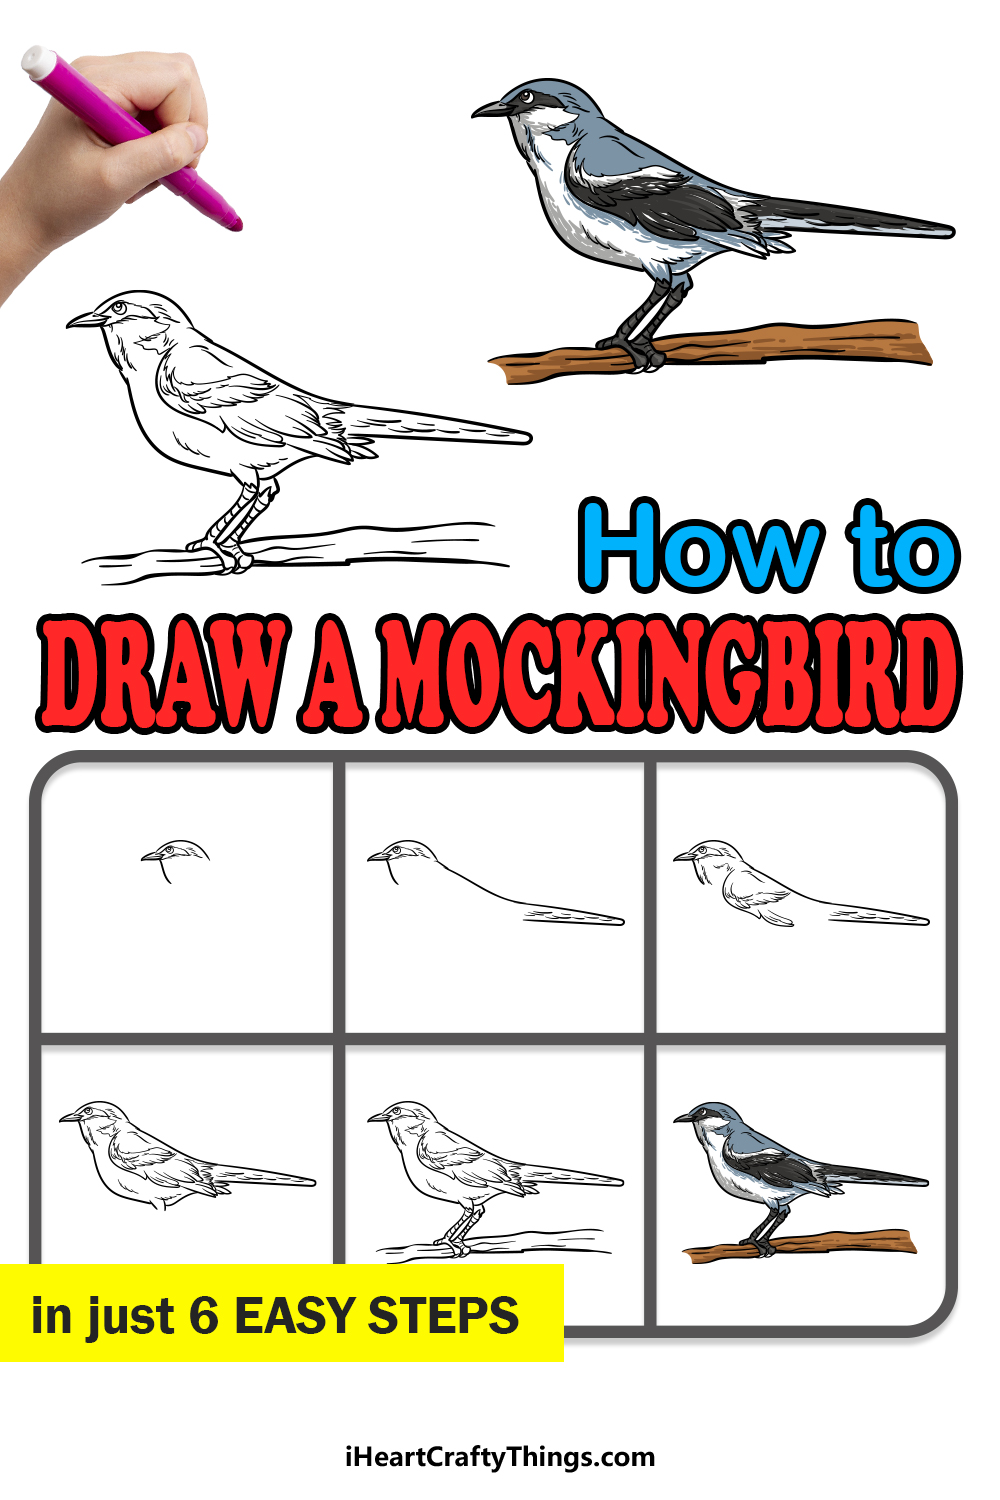 how to draw a Mockingbird in 6 easy steps